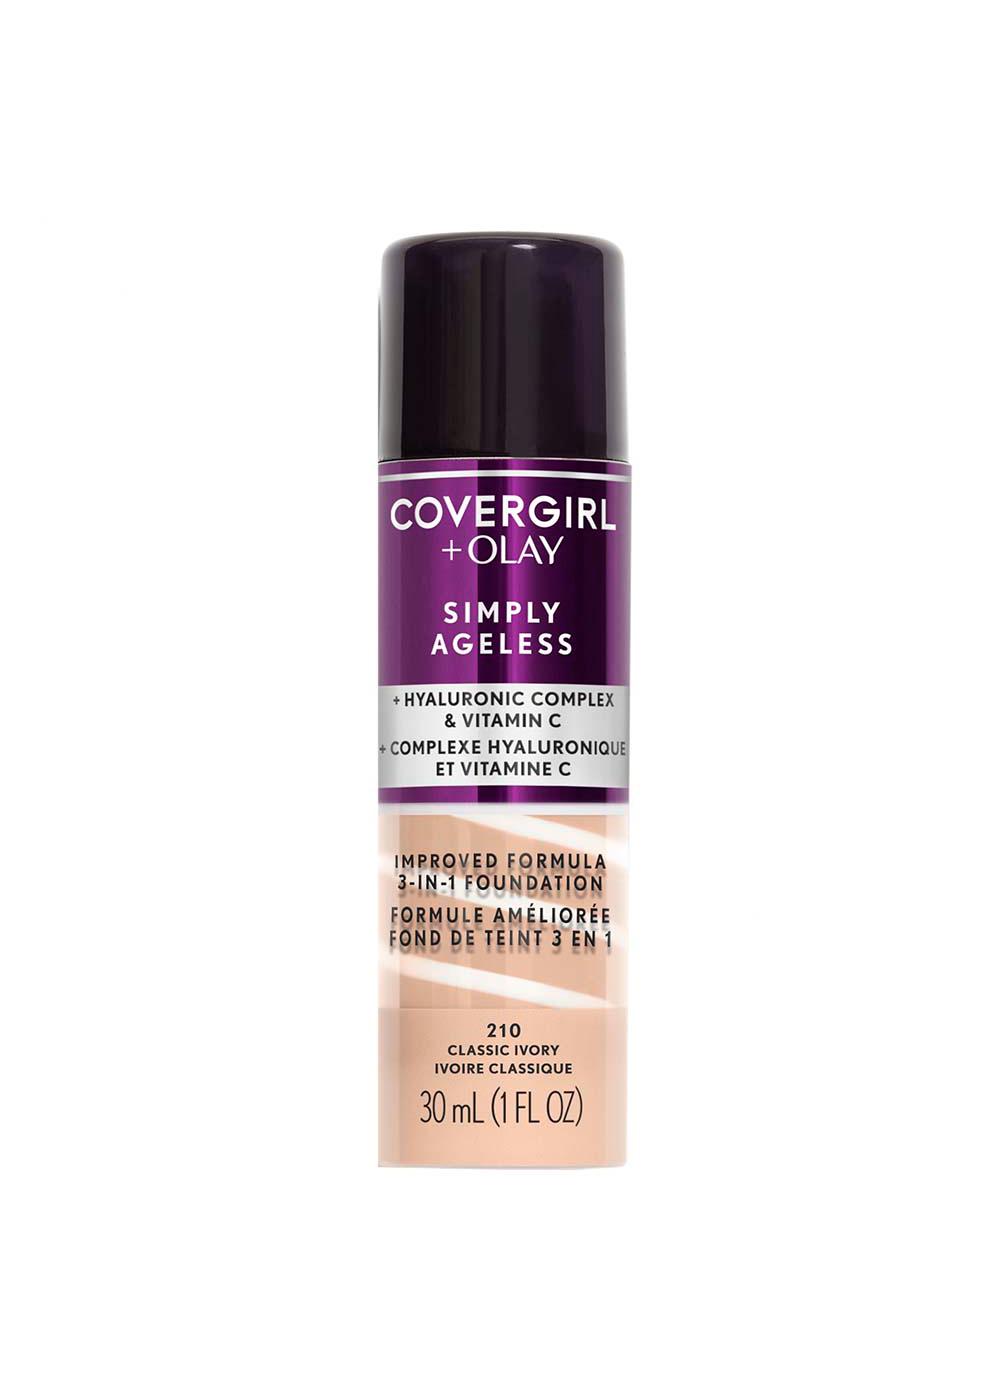 Covergirl Simply Ageless 3-in-1 Liquid Foundation 210 Classic Ivory; image 1 of 6